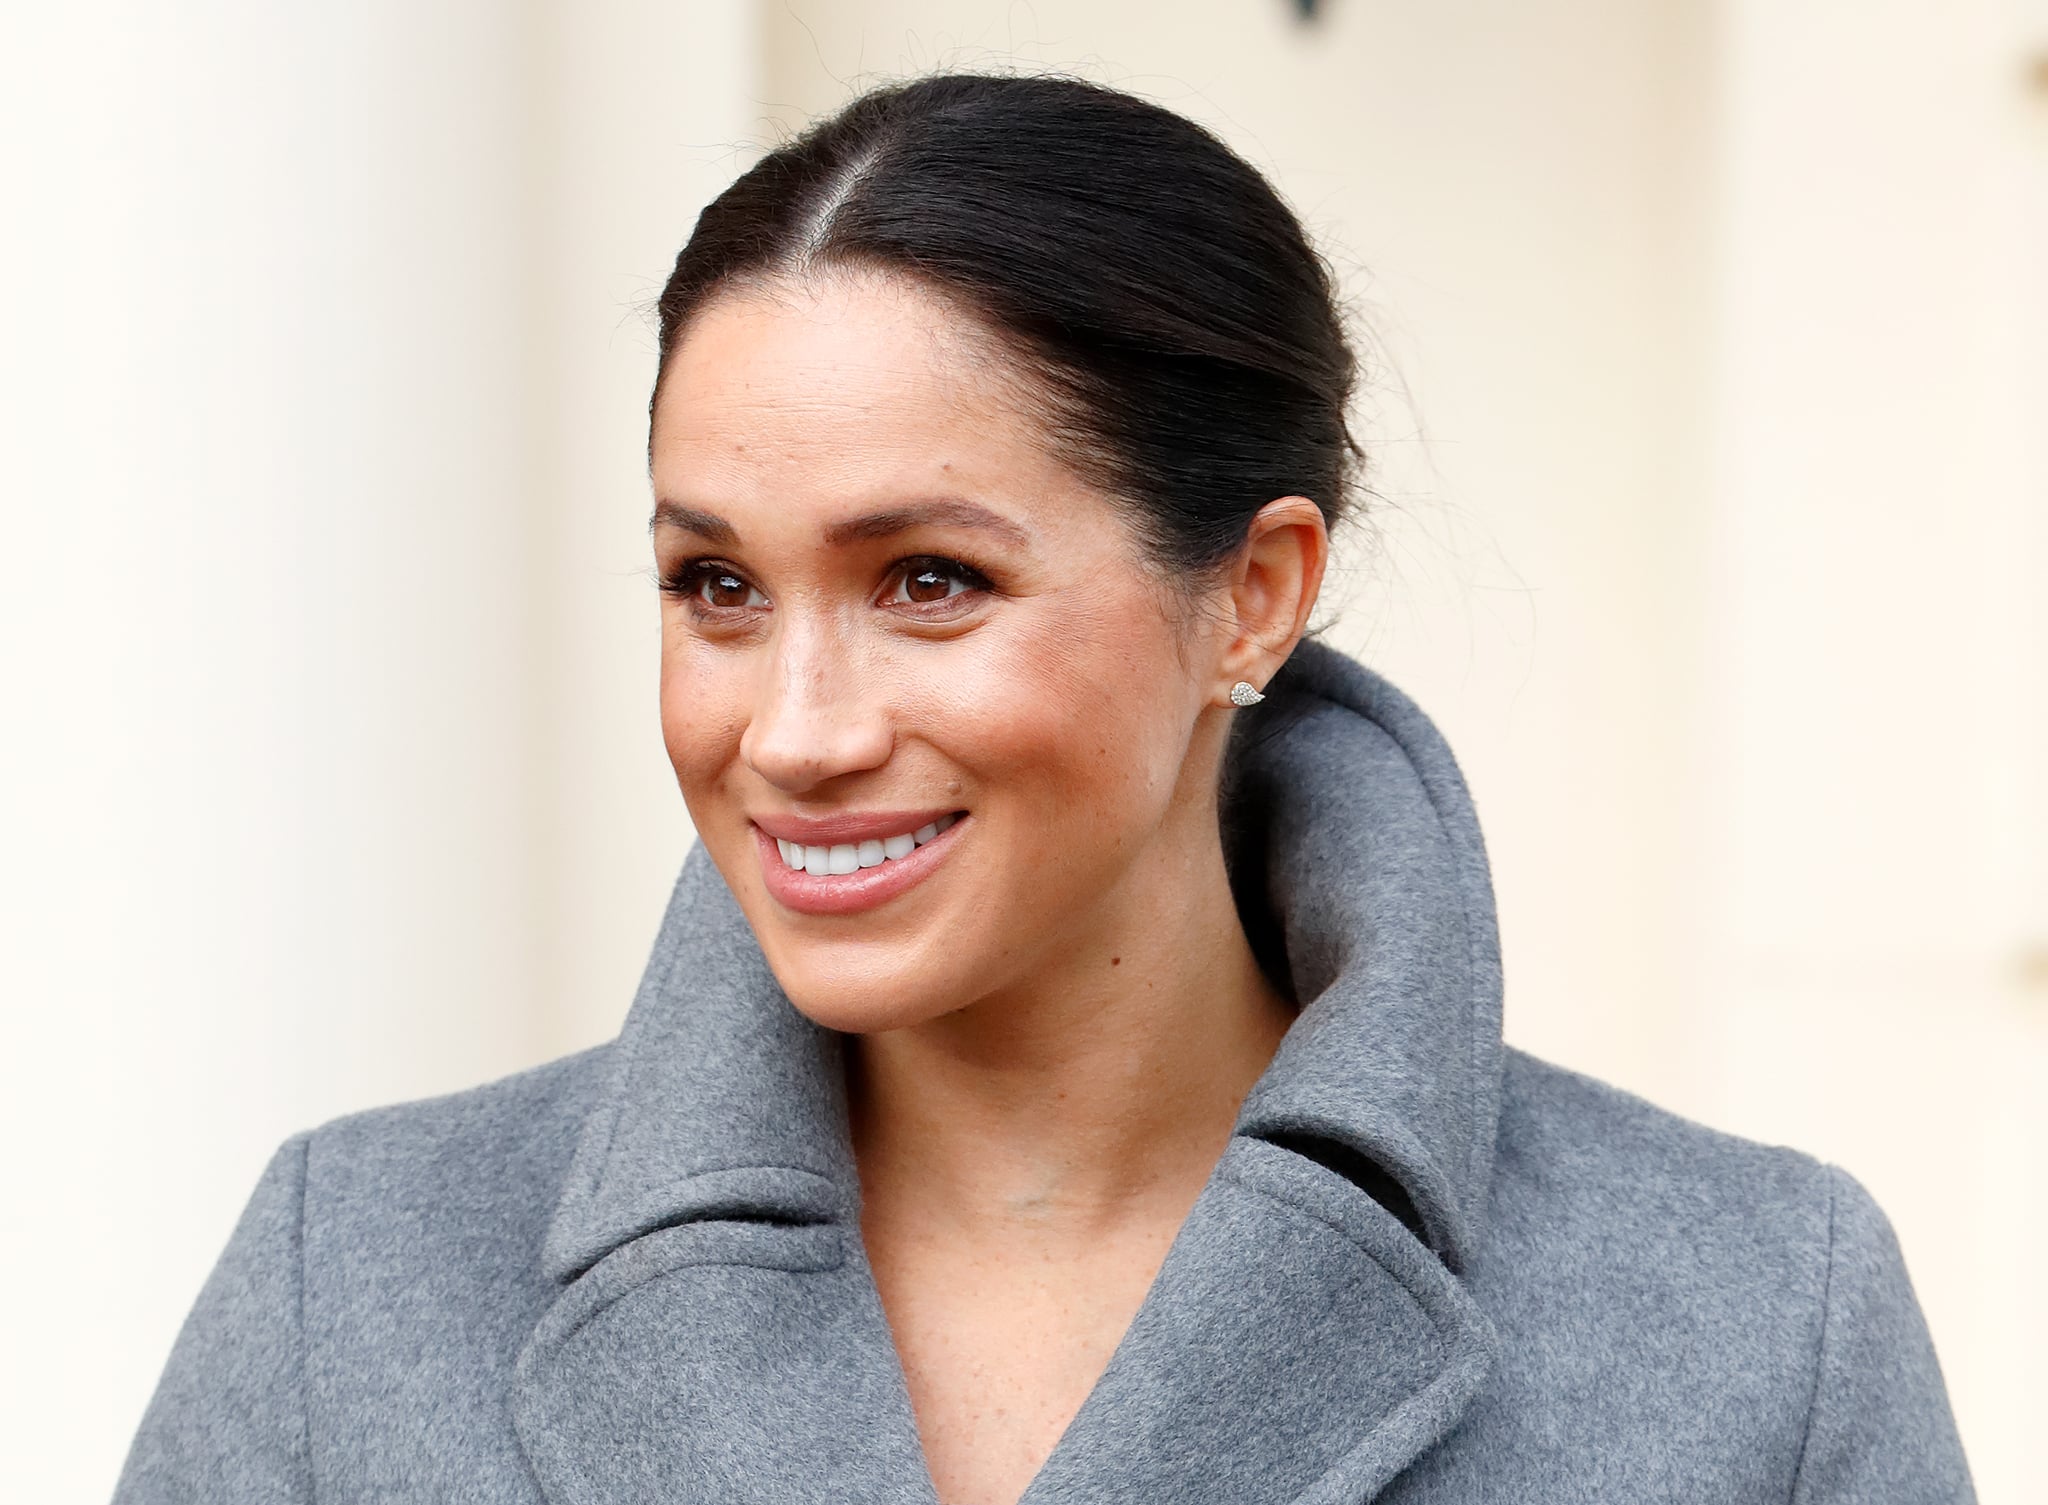 TWICKENHAM, UNITED KINGDOM - DECEMBER 18: (EMBARGOED FOR PUBLICATION IN UK NEWSPAPERS UNTIL 24 HOURS AFTER CREATE DATE AND TIME) Meghan, Duchess of Sussex visits the Royal Variety Charity's Brinsworth House on December 18, 2018 in Twickenham, England. Brinsworth House is a residential nursing and care home for those who have worked professionally in the entertainment industry. (Photo by Max Mumby/Indigo/Getty Images)